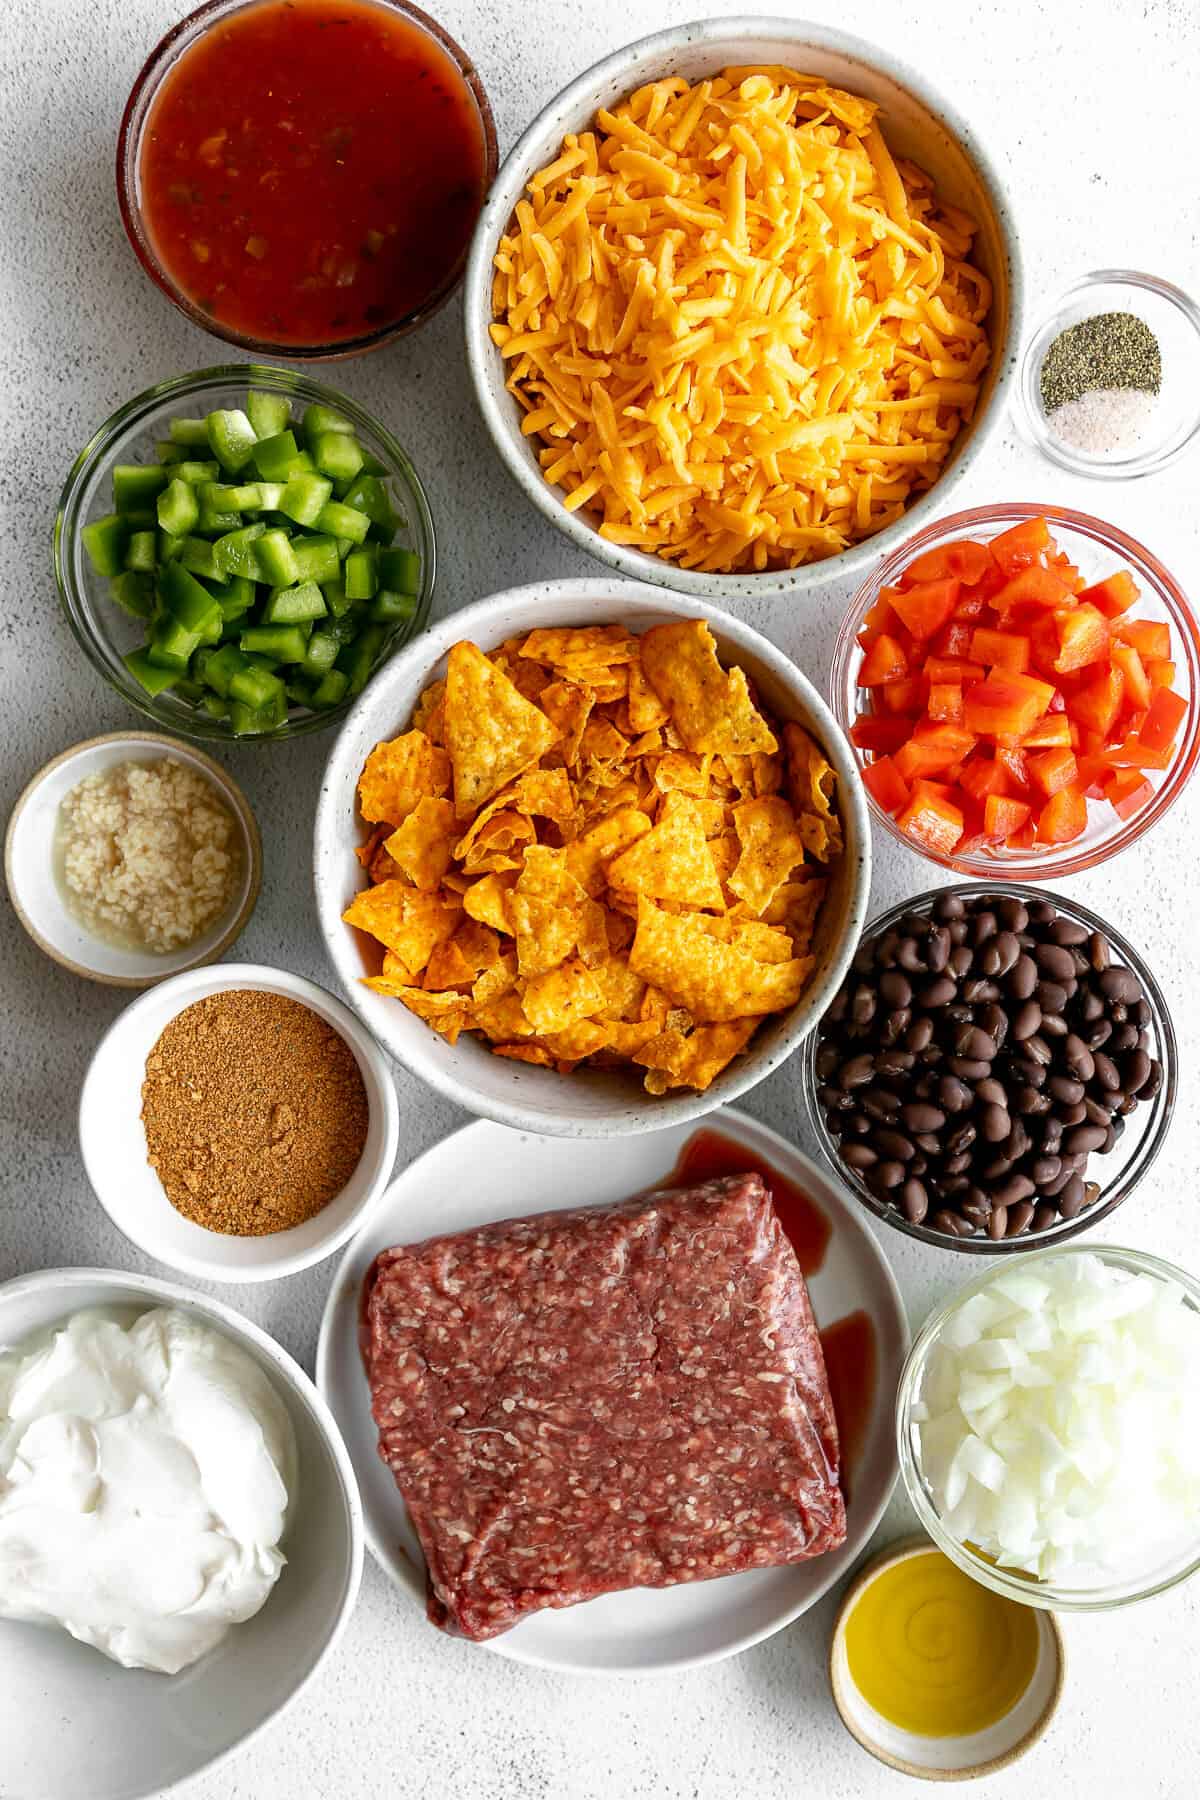 Bowls of ingredients to make easy Dorito casserole.